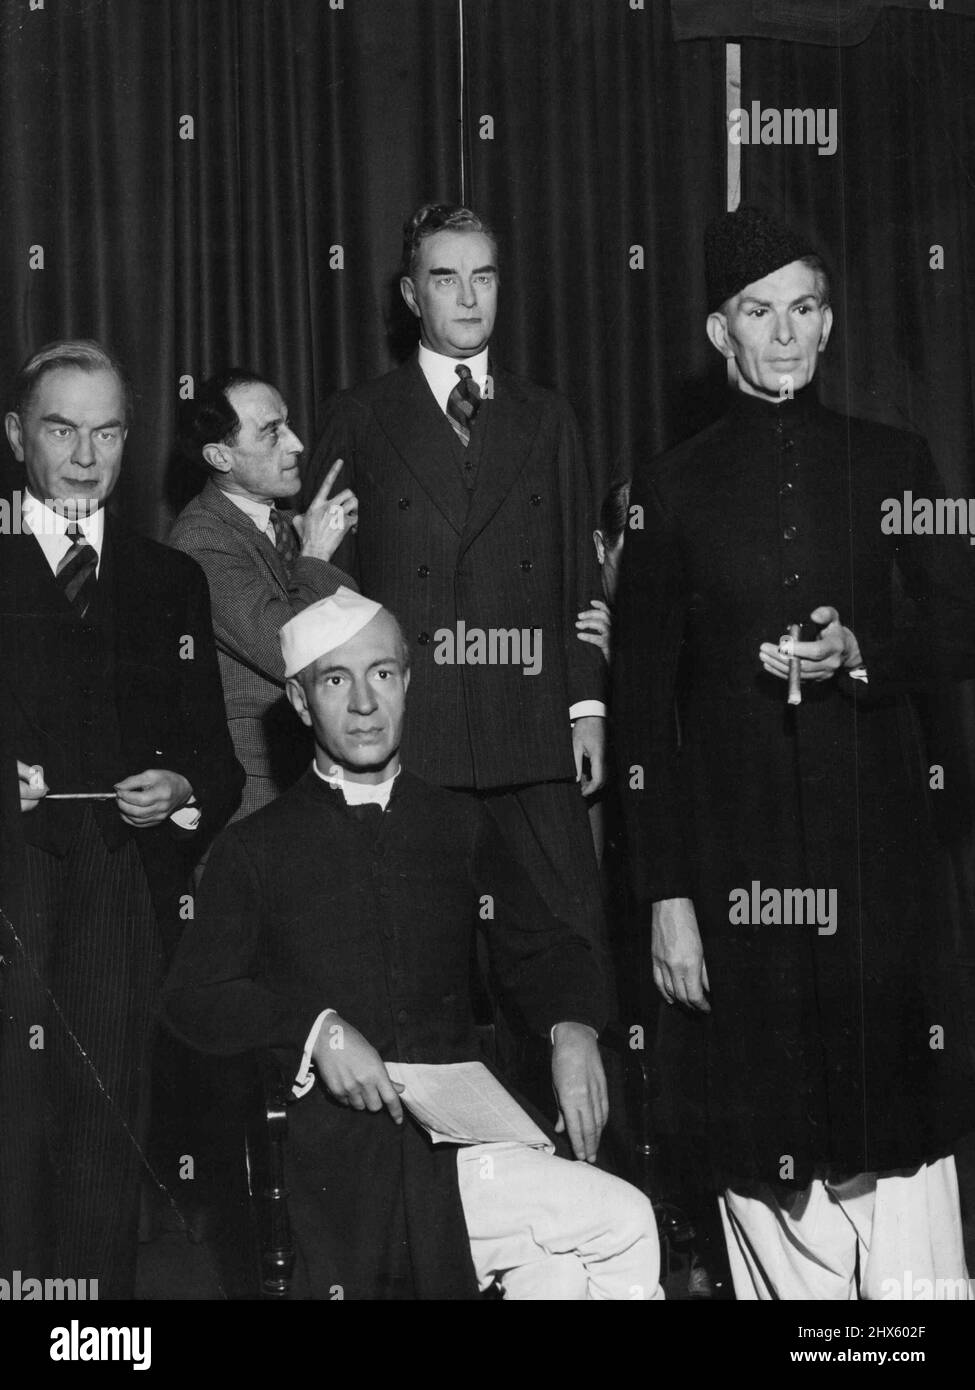 Madame Tussaud's wax works London, Ben Chipley ex PM of Aust. has been removed and has been re/laced by Bob Meyies, after models are removed they are then melted down and wax is re-used to construct ***** models. Around R. G. Menzies L to R: Mc Kenzies King, ex P M of Canada, Nehru, PM of India, R. Menzies of Aust. Mohammed Ali, Gov.-Gen. of Pakistan. January 18, 1950.;Madame Tussaud's wax works London, Ben Chipley ex PM of Aust. has been removed and has been re/laced by Bob Meyies, after mode Stock Photo